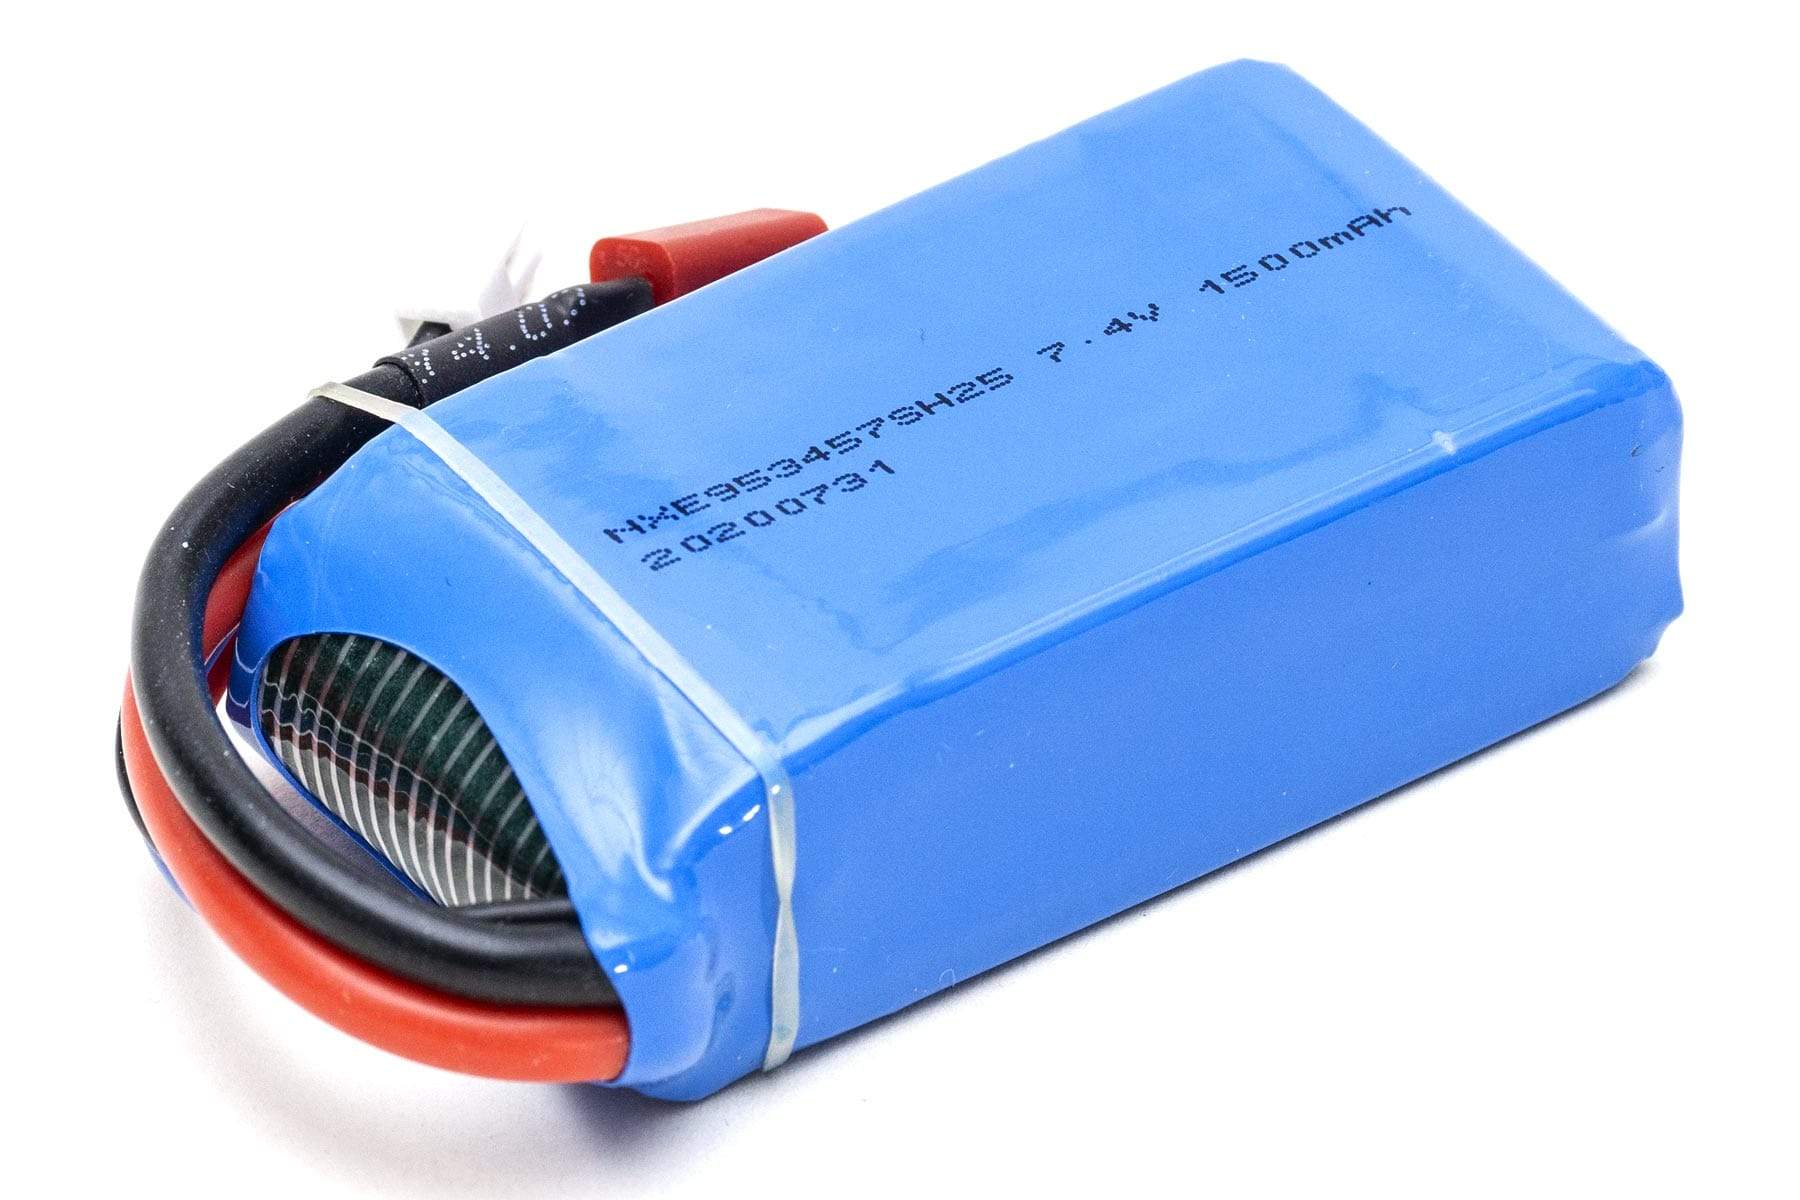 XK 1/18 Scale 7.4V 1500mah LiPo Battery with T-Connector WLT-A959-B-23-001